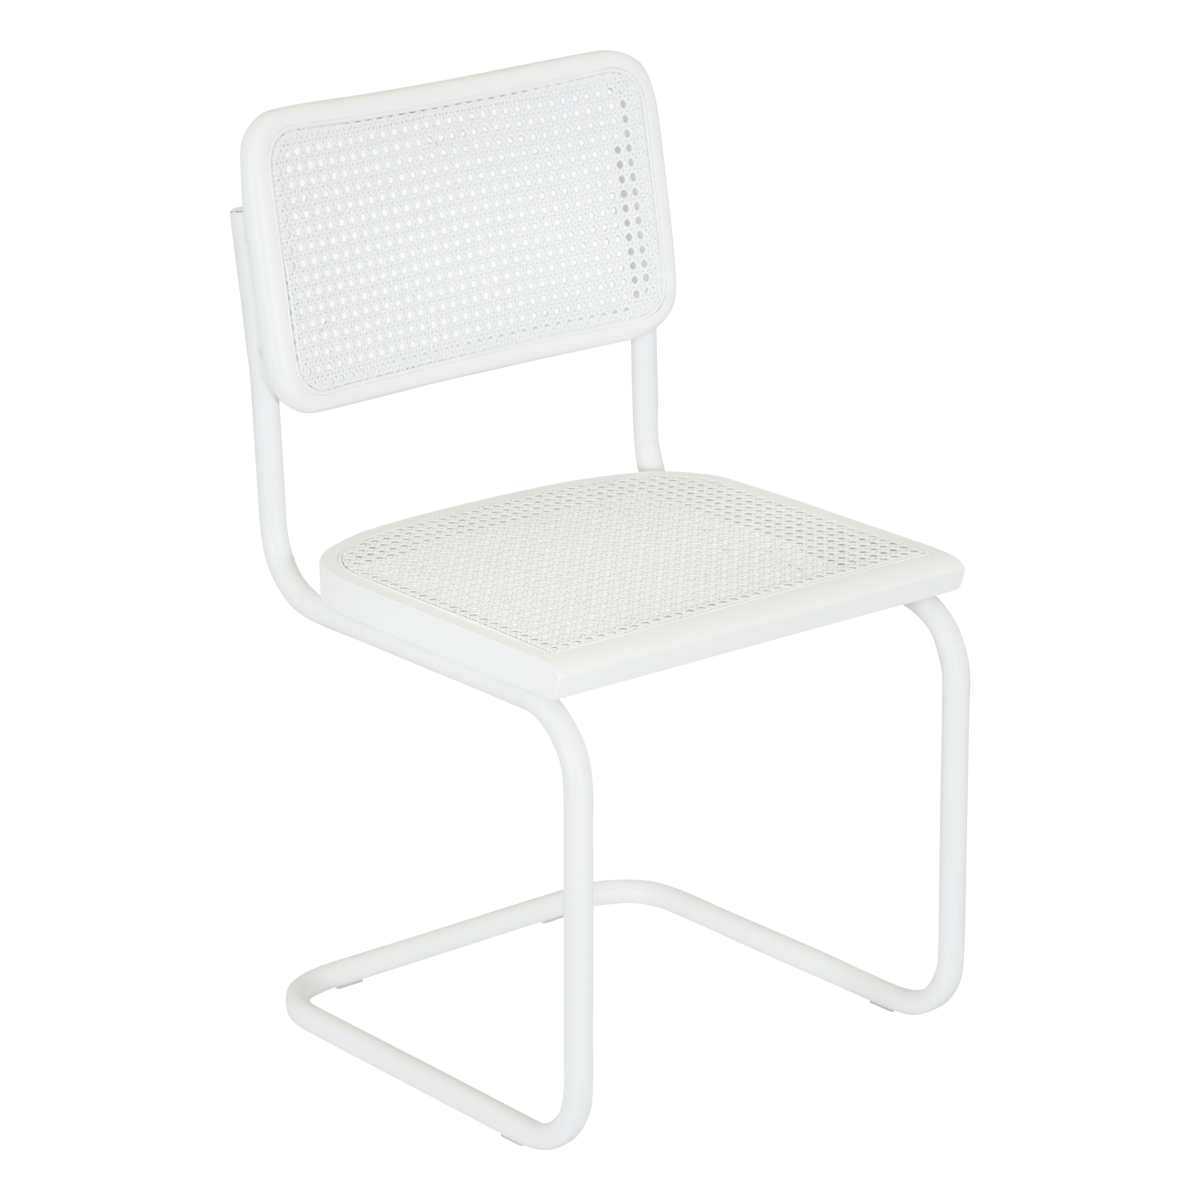 Picture of Breuer Chair Company UNB-BCC-CSCA-SC-WHTF-WHTW-WHTC Breuer Chair Company Marcel Breuer B32 Cesca Cane Cantilever Side Chair w/ White Steel Frame White Wood & White Cane (Made in Italy) by Furnish Theory